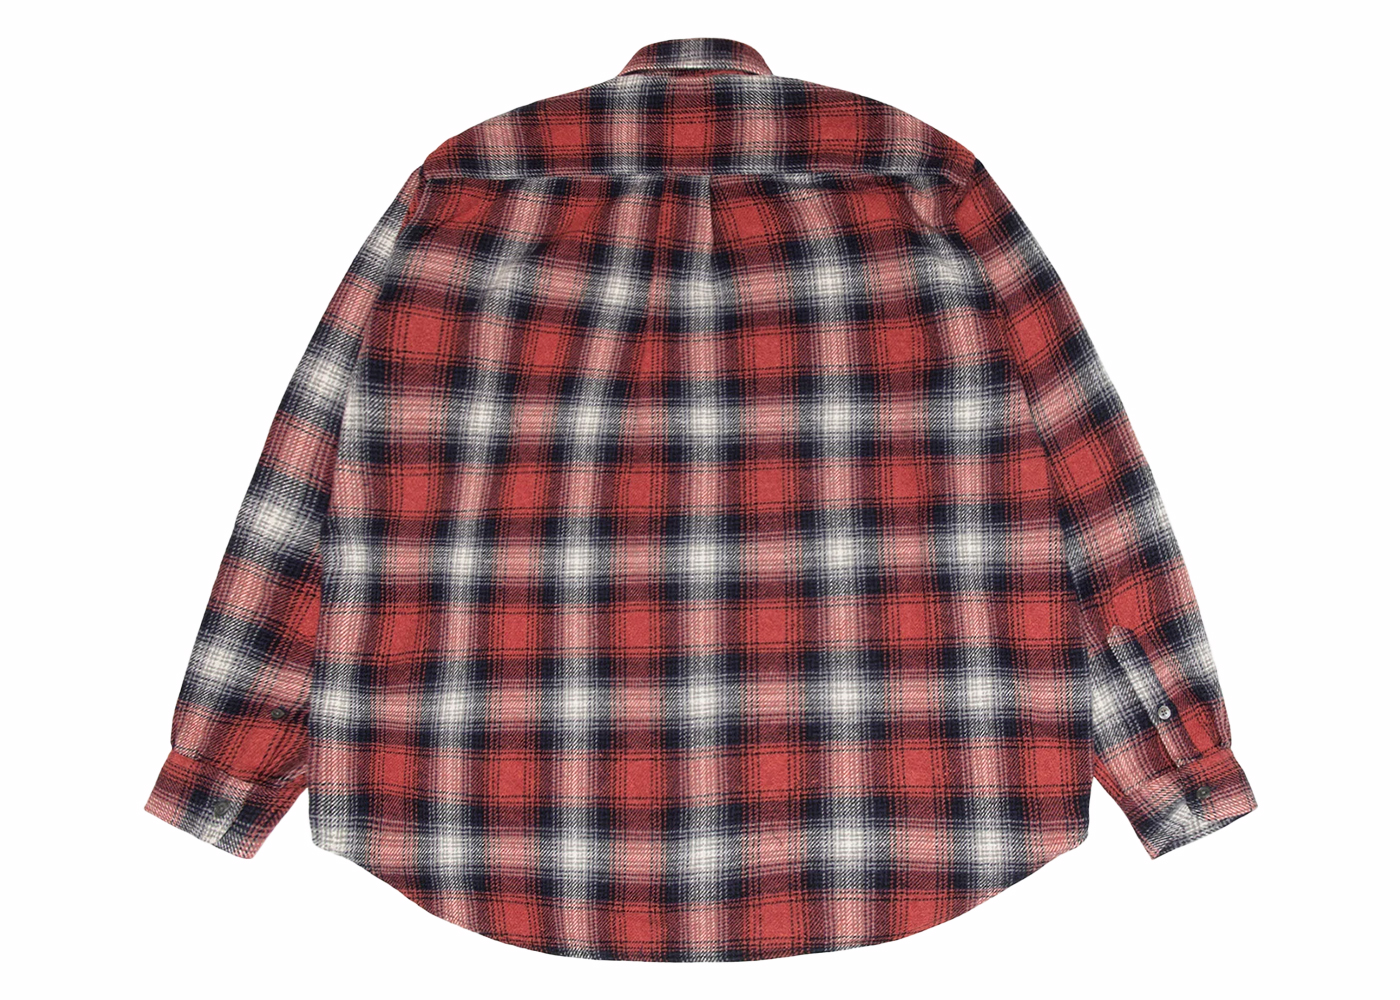 Stussy x Our Legacy Work Shop Shirt Red Arborist Check Men's 